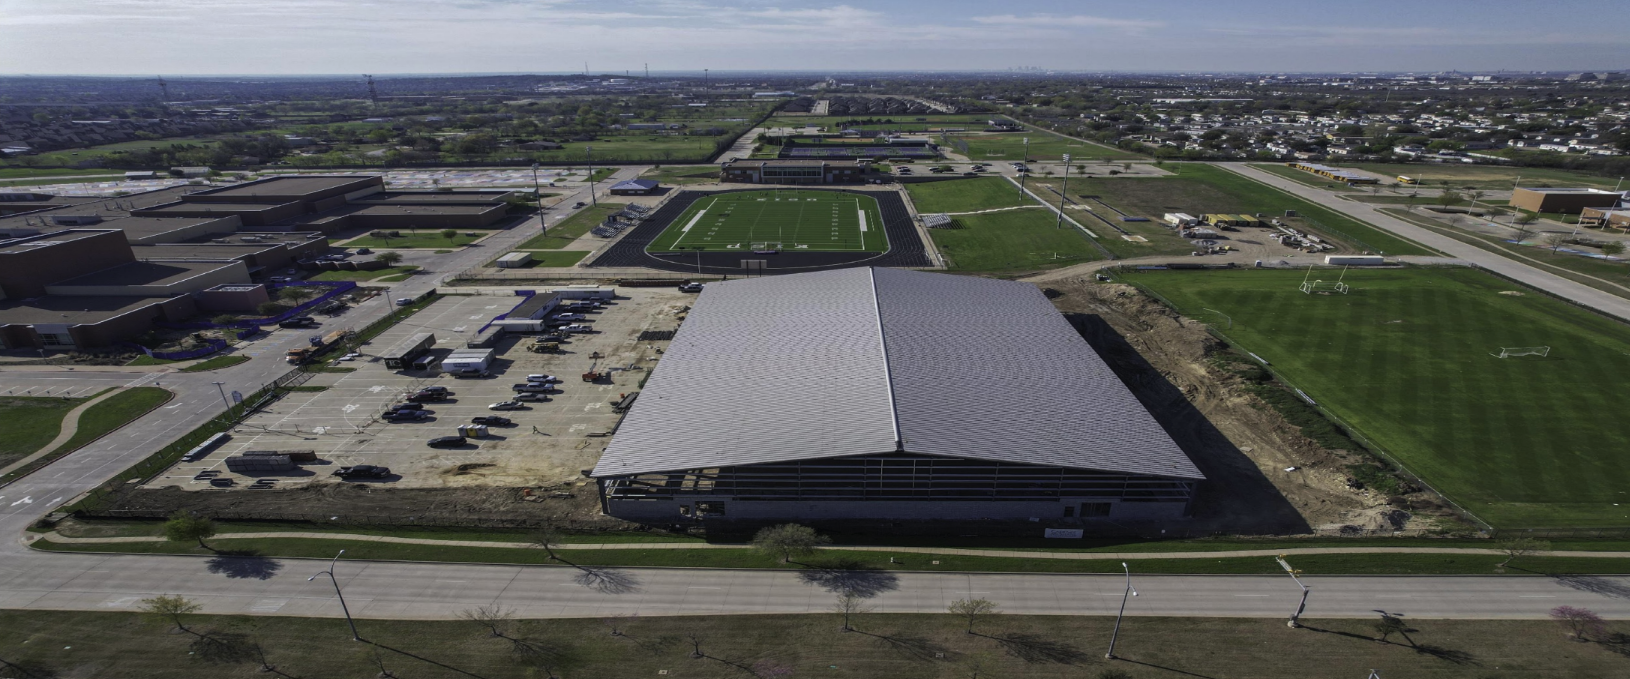 Aerial view of Timber Creek HS indoor facility.